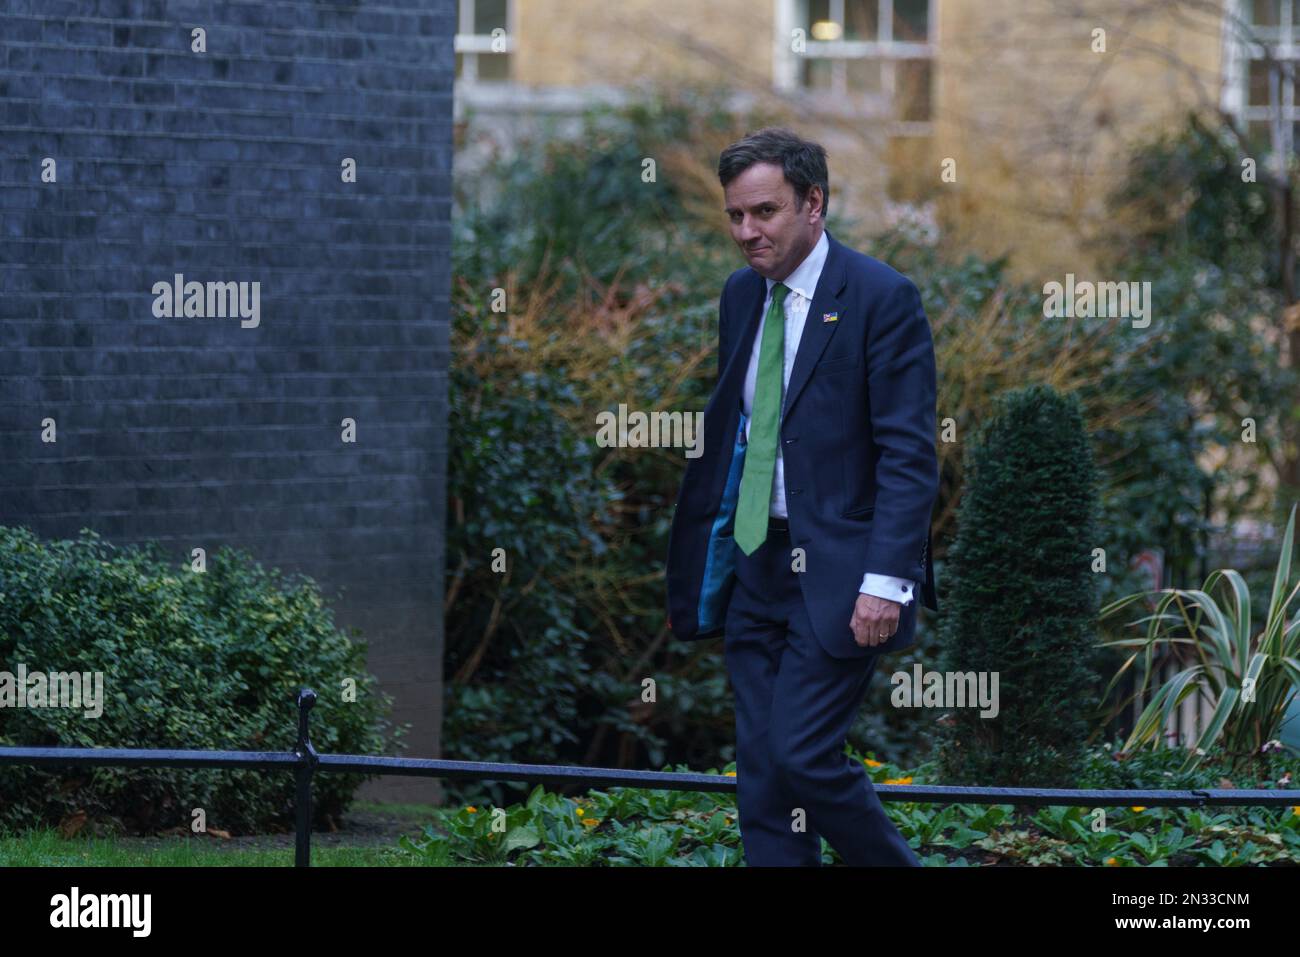 Downing St, London, 7th February 2023, UK Following this mornings reshuffle, Cabinet Ministers arrive for a delayed cabinet meeting held in the afternoon.  PICTURED: Greg Hands, newly appointed Conservative Party Chairman Bridget Catterall AlamyLiveNews Stock Photo